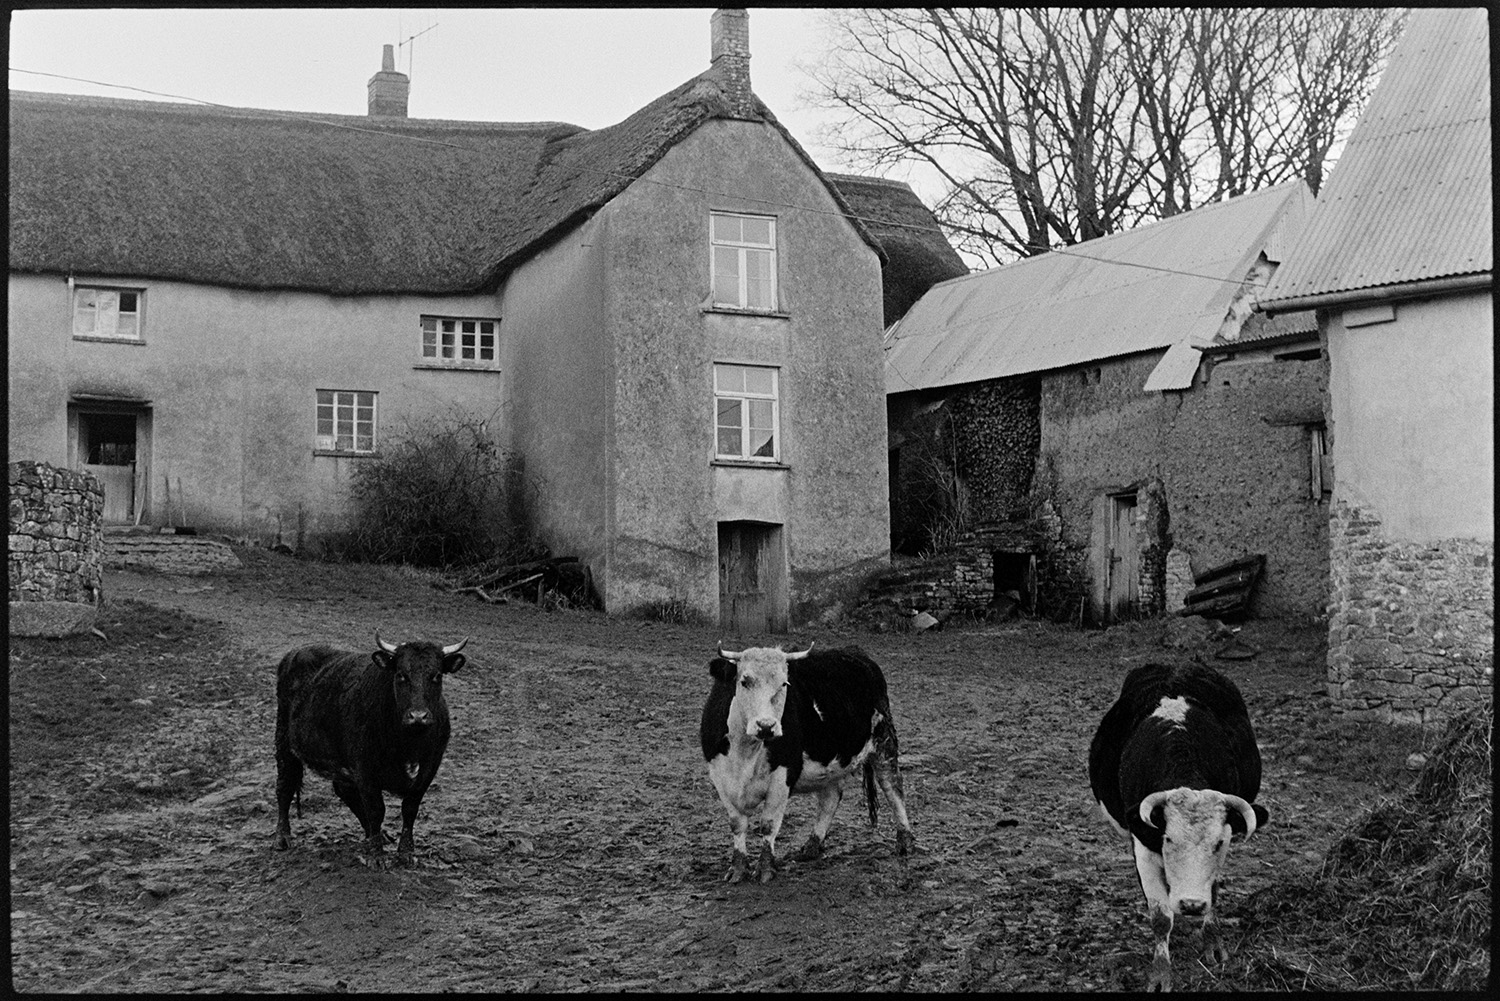 Farmyard with cows, farmhouse. 
[Three horned cattle in the muddy farmyard at Bridgetown Farm near Iddesleigh. Barns with corrugated iron roofs and the thatched farmhouse are visible in the background.]